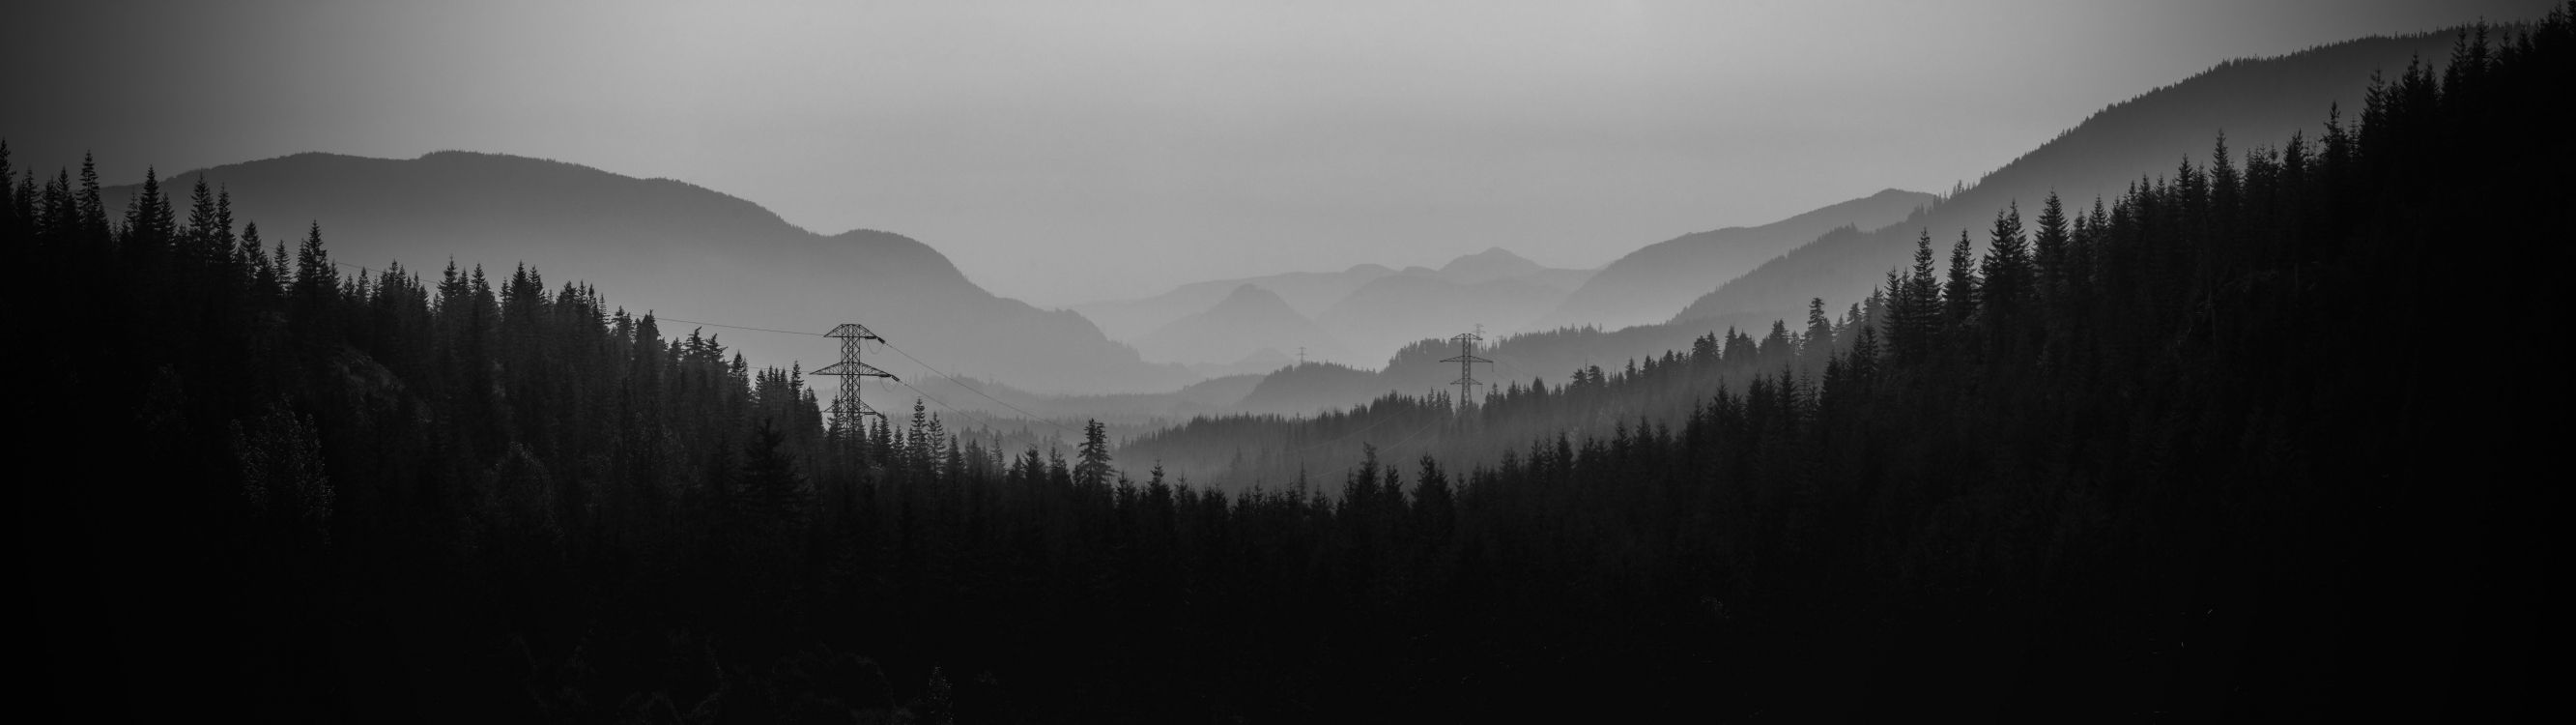 Green Trees Near Mountain During Daytime. Wallpaper in 7680x2160 Resolution